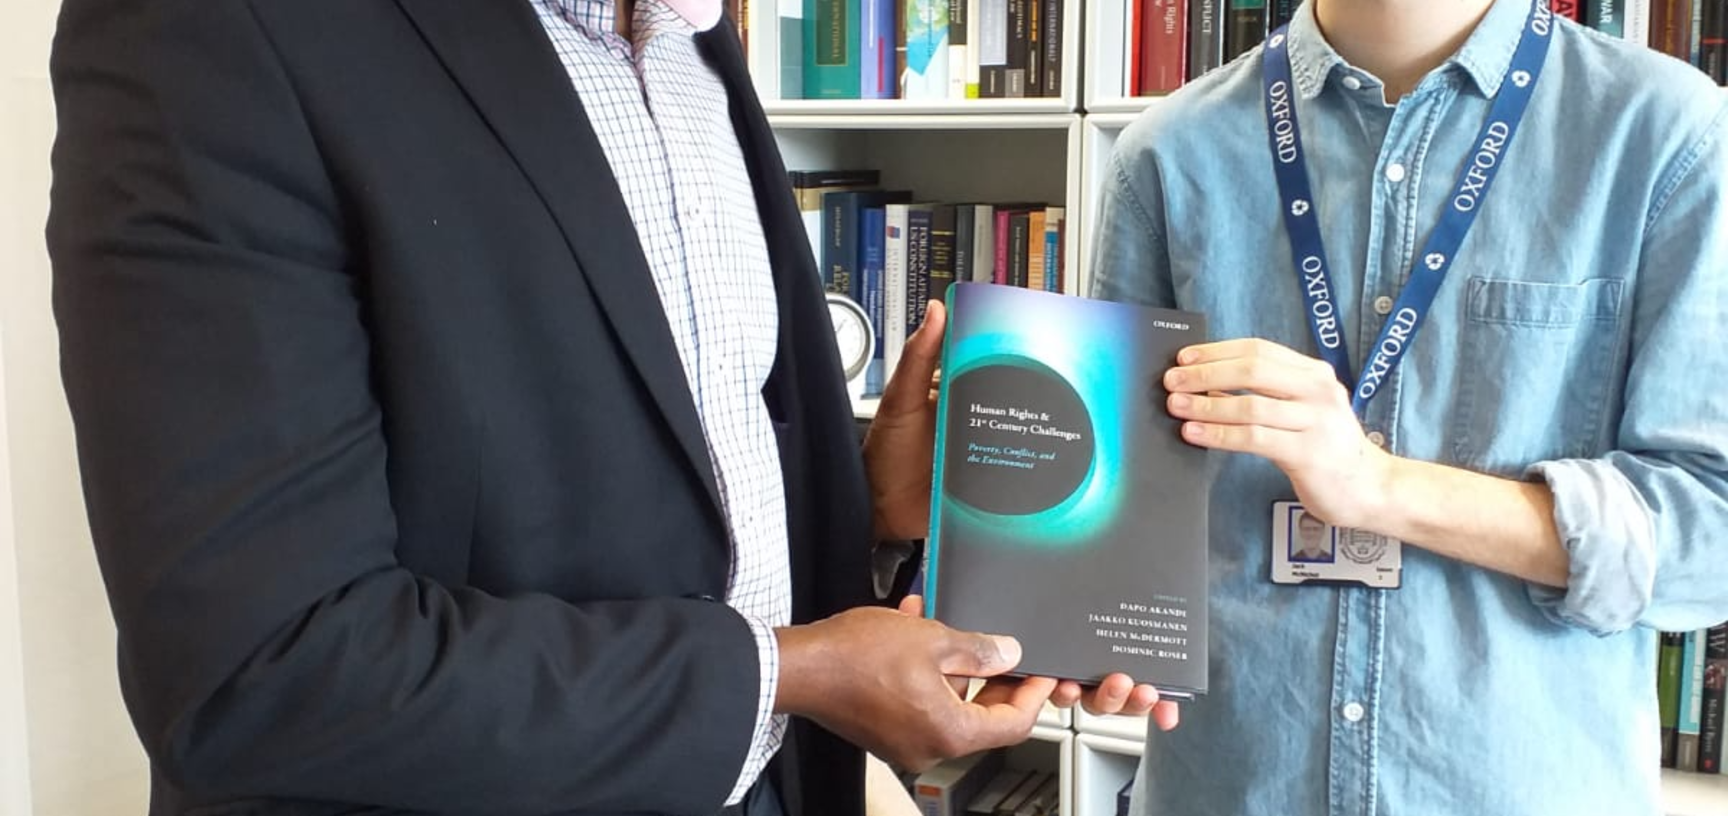 Dapo Akande and Jack McNichol (OUP) with the book 'Human Rights and 21st Century Challenges' 